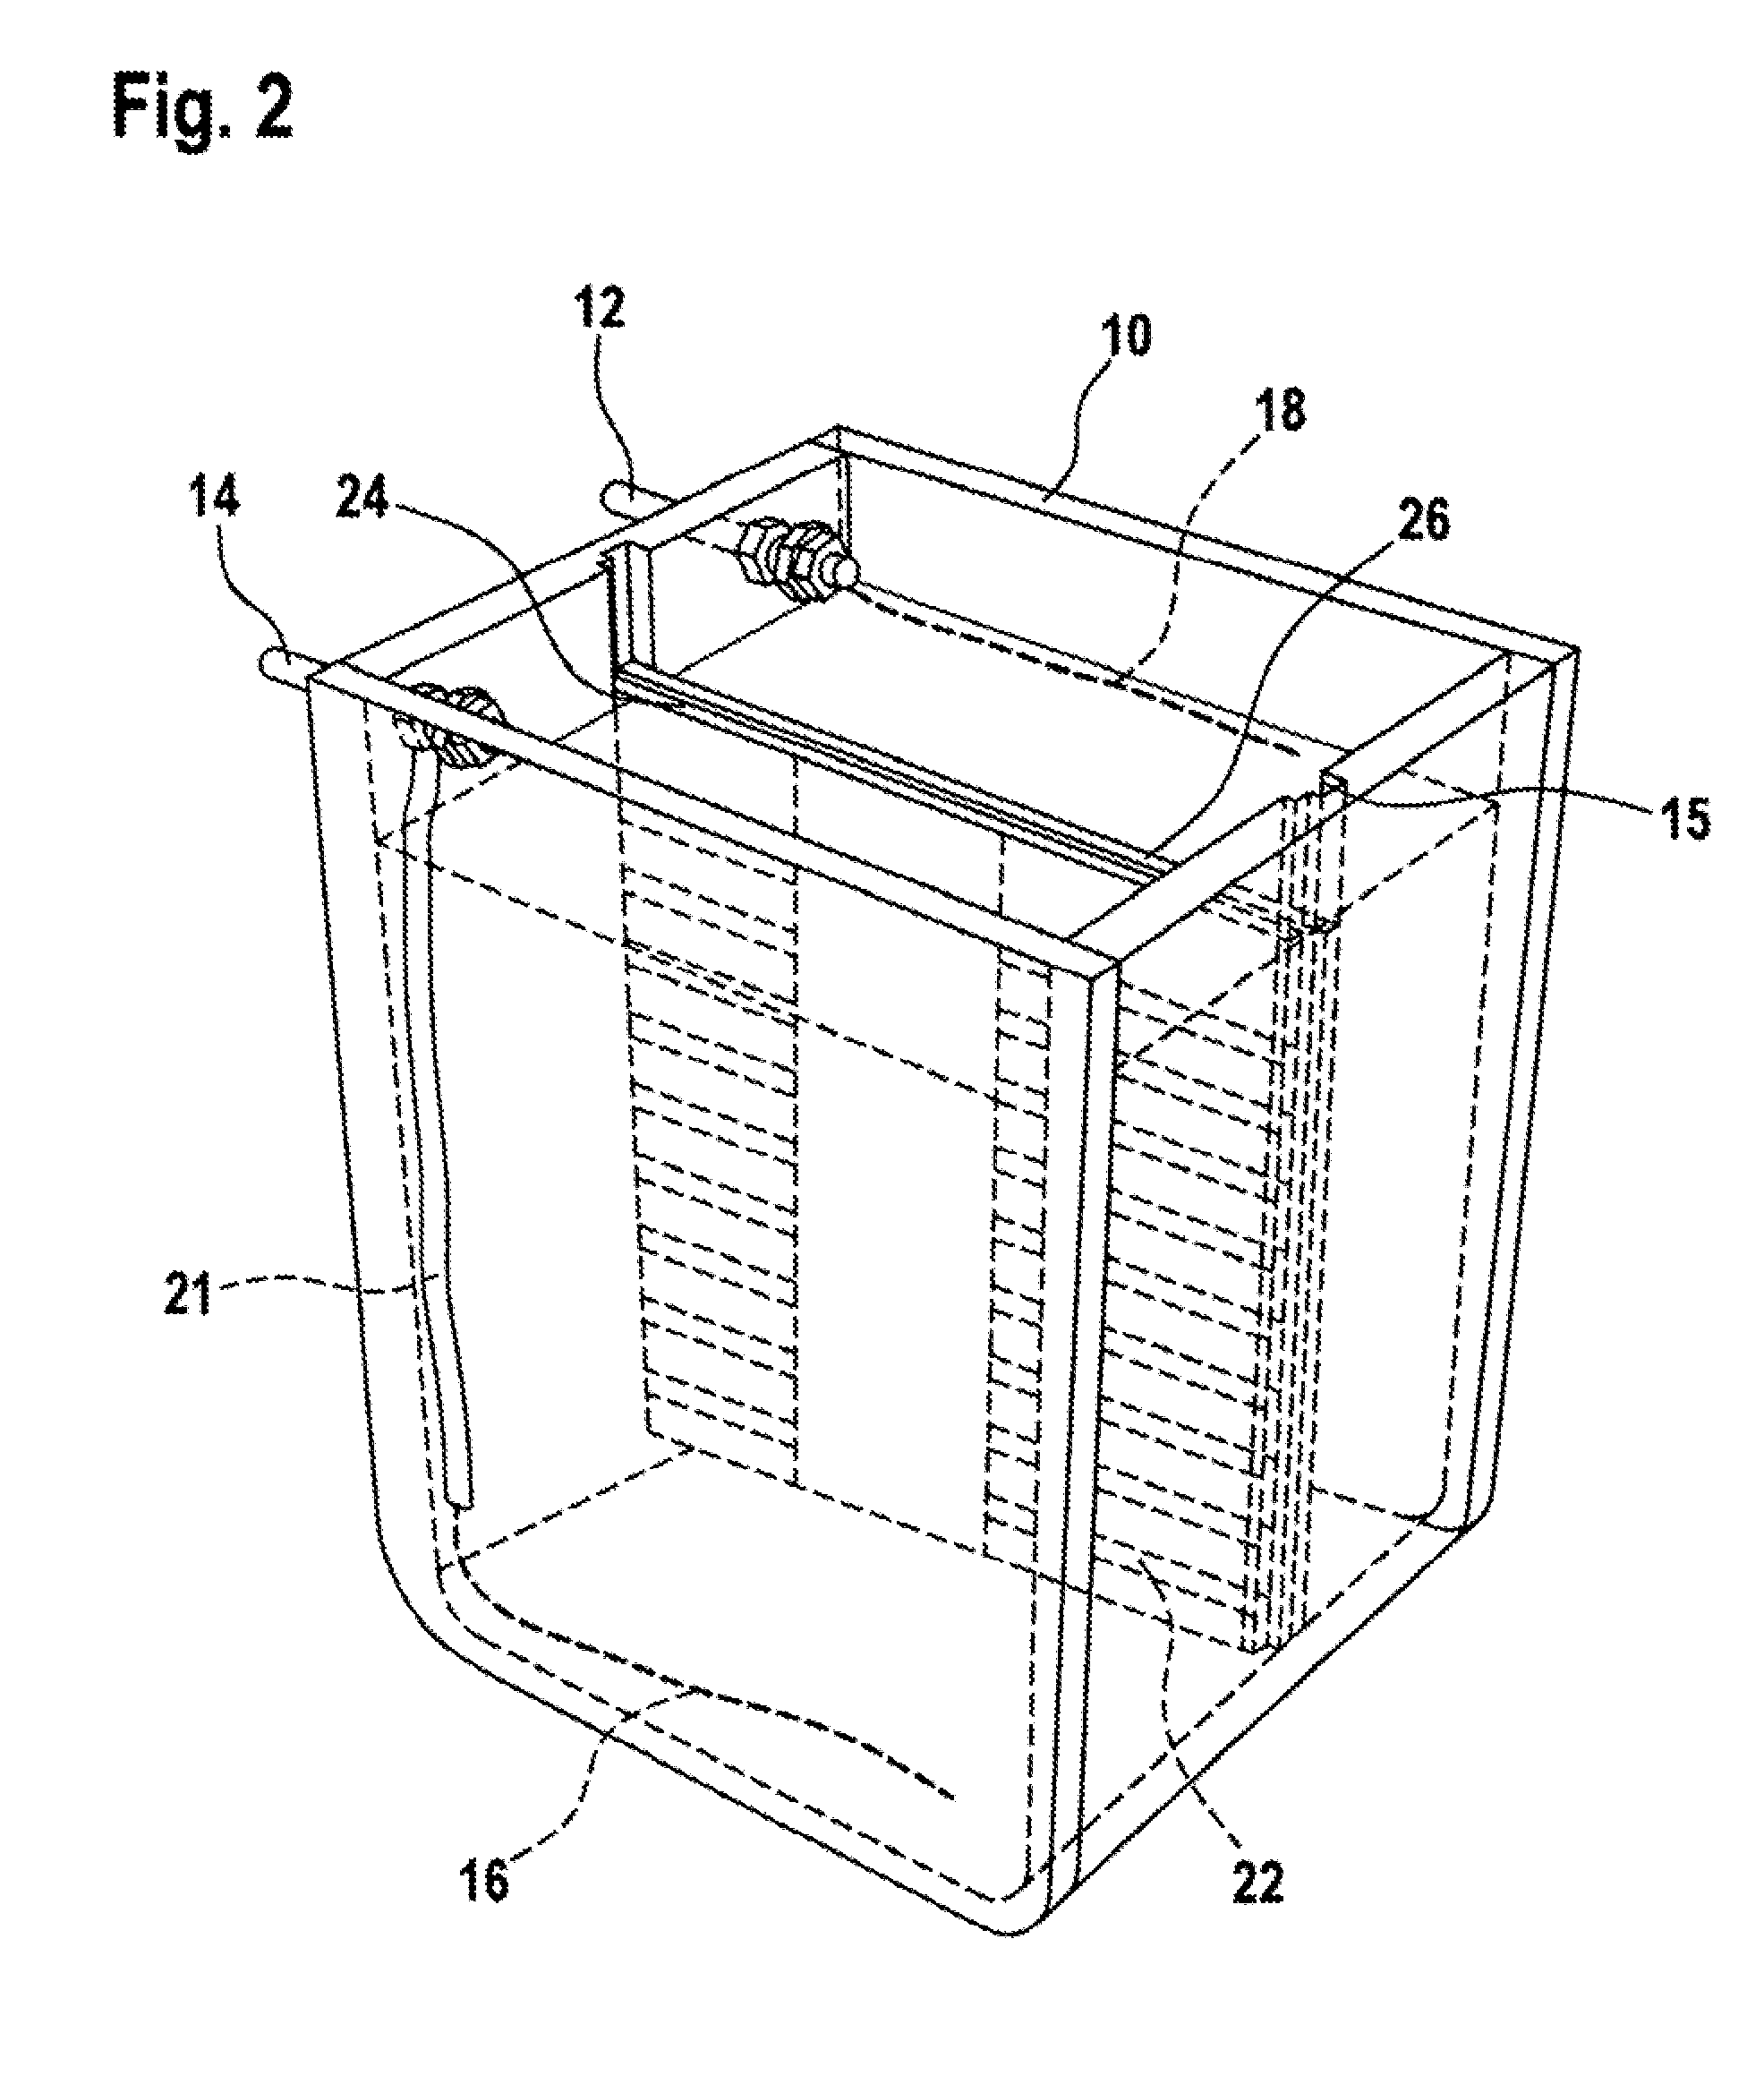 Apparatus, method, and gel system for analytical and preparative electrophoresis